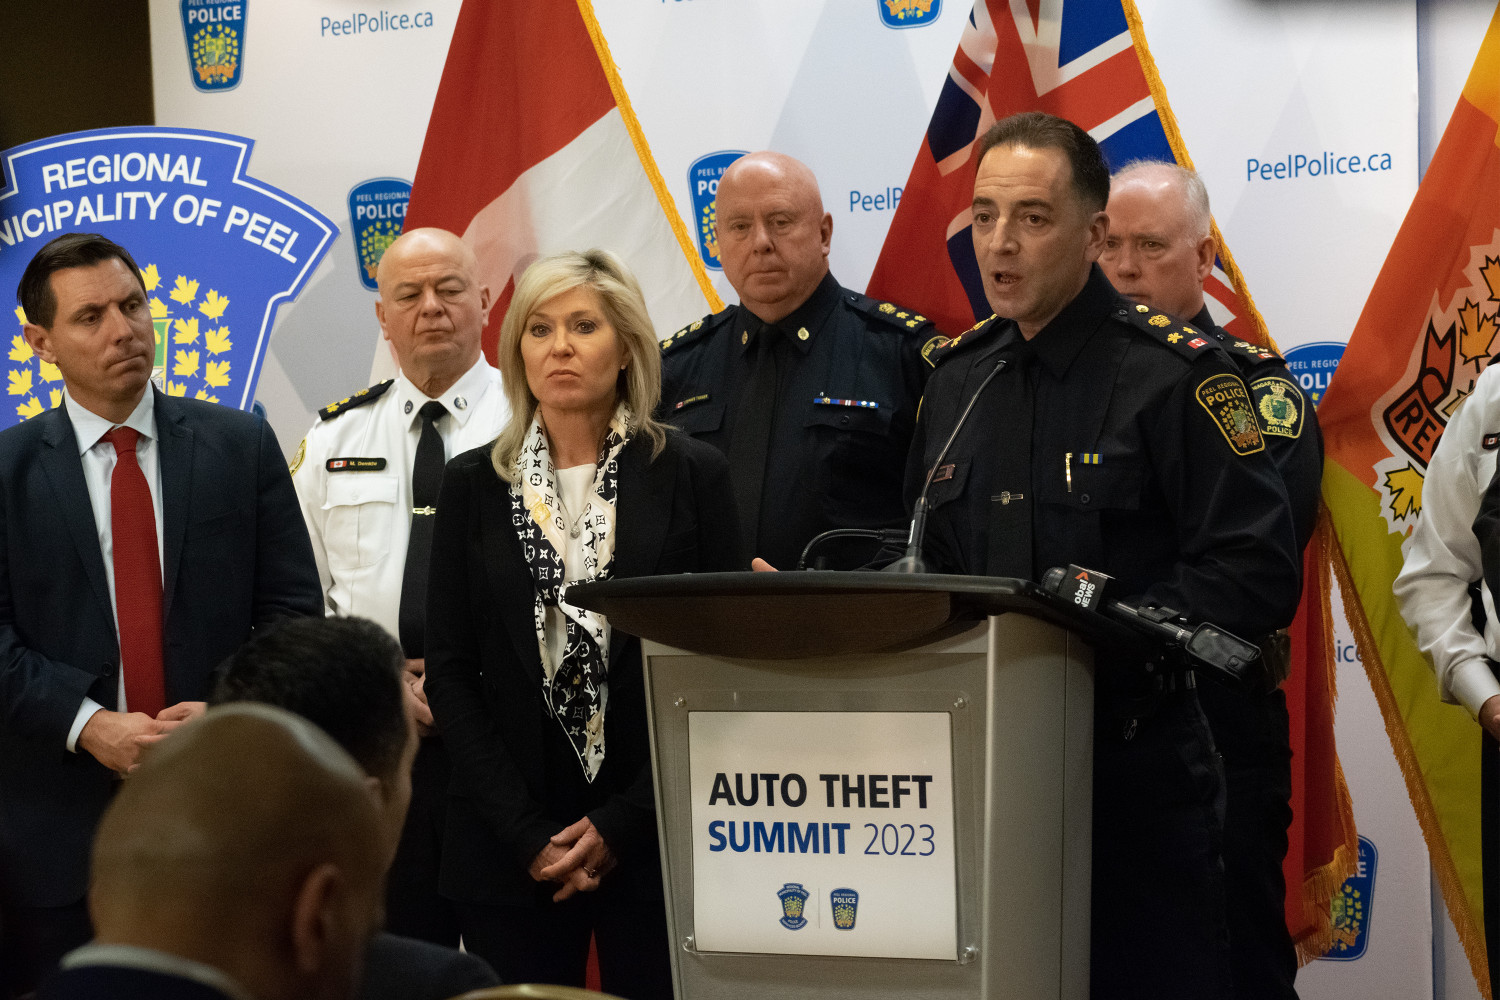 Peel a ‘cash cow’ for organized crime; police to join multi-jurisdictional task force as auto thefts surge